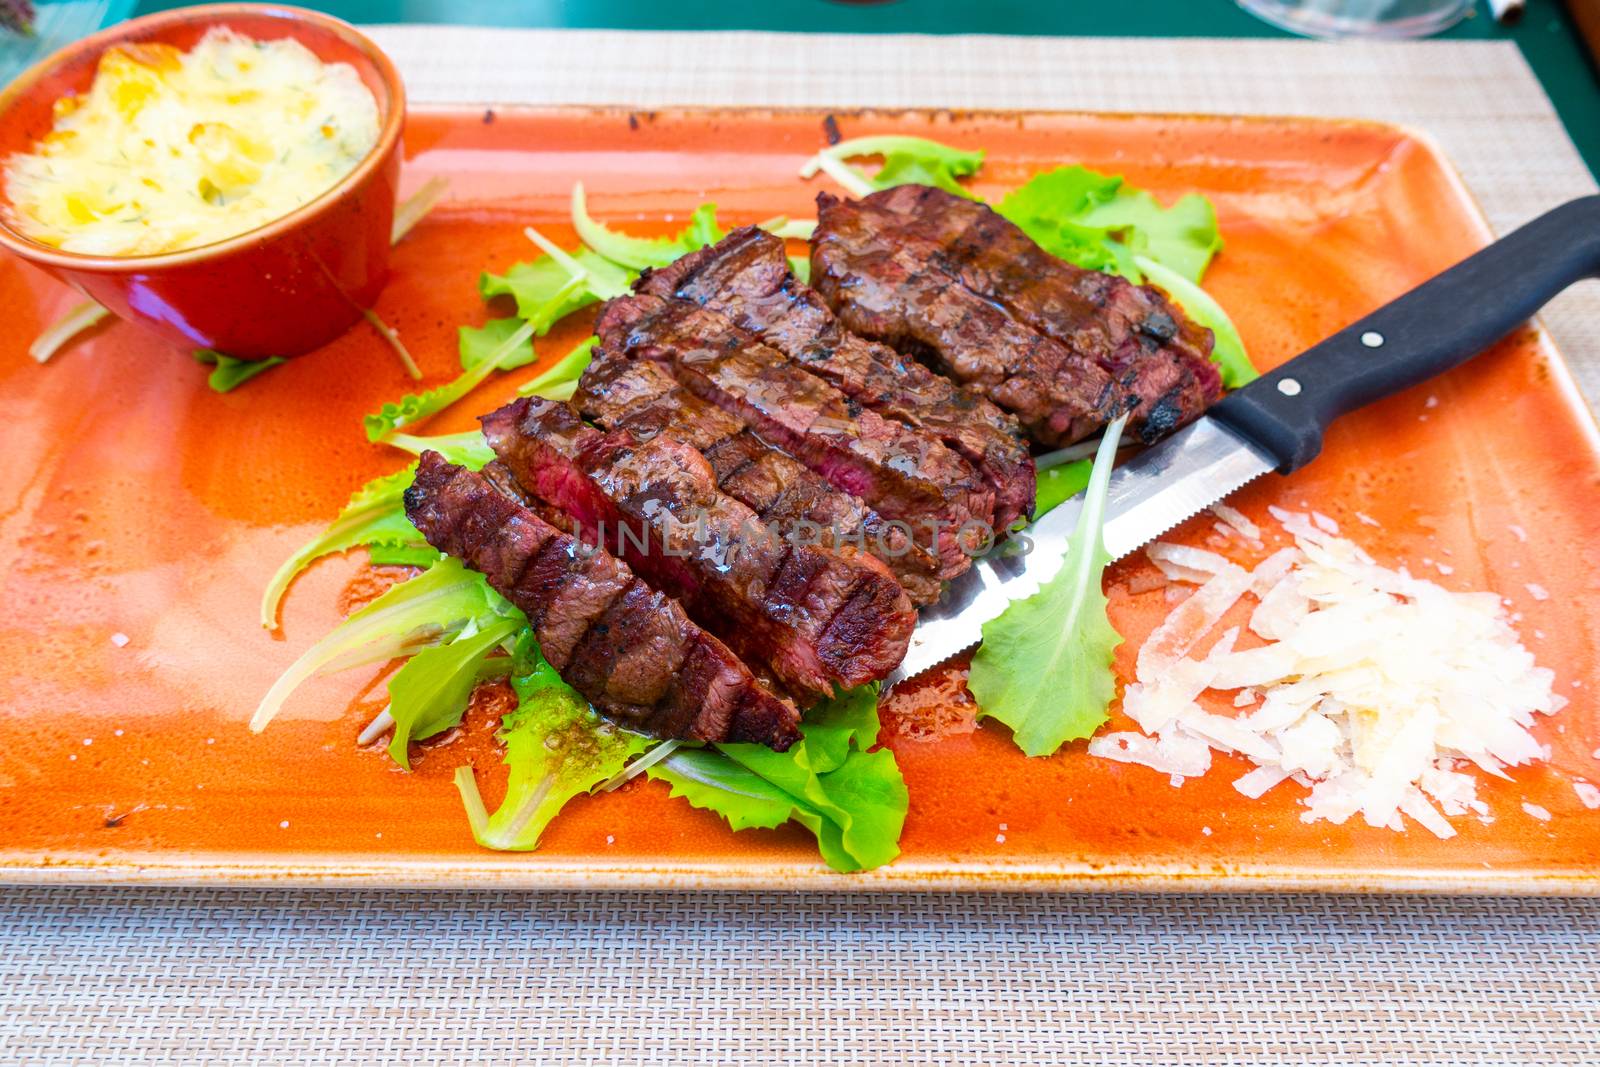 Traditional Italian Tagliata Steak with Parmesan and Salad as close-up on a plate by asafaric